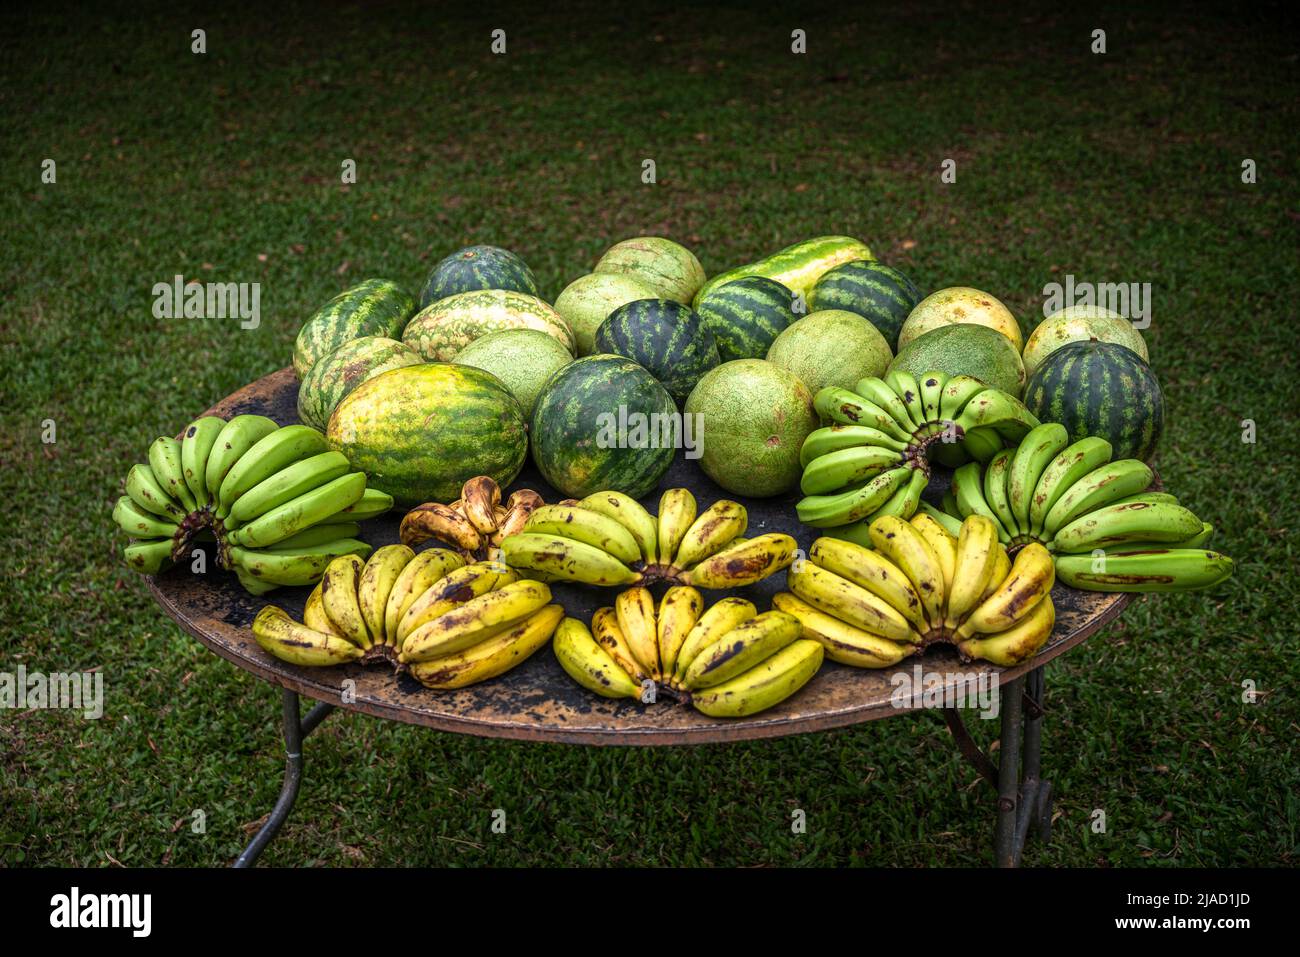 Bananas and watermelons on display on a round table at a country market in Panama Stock Photo